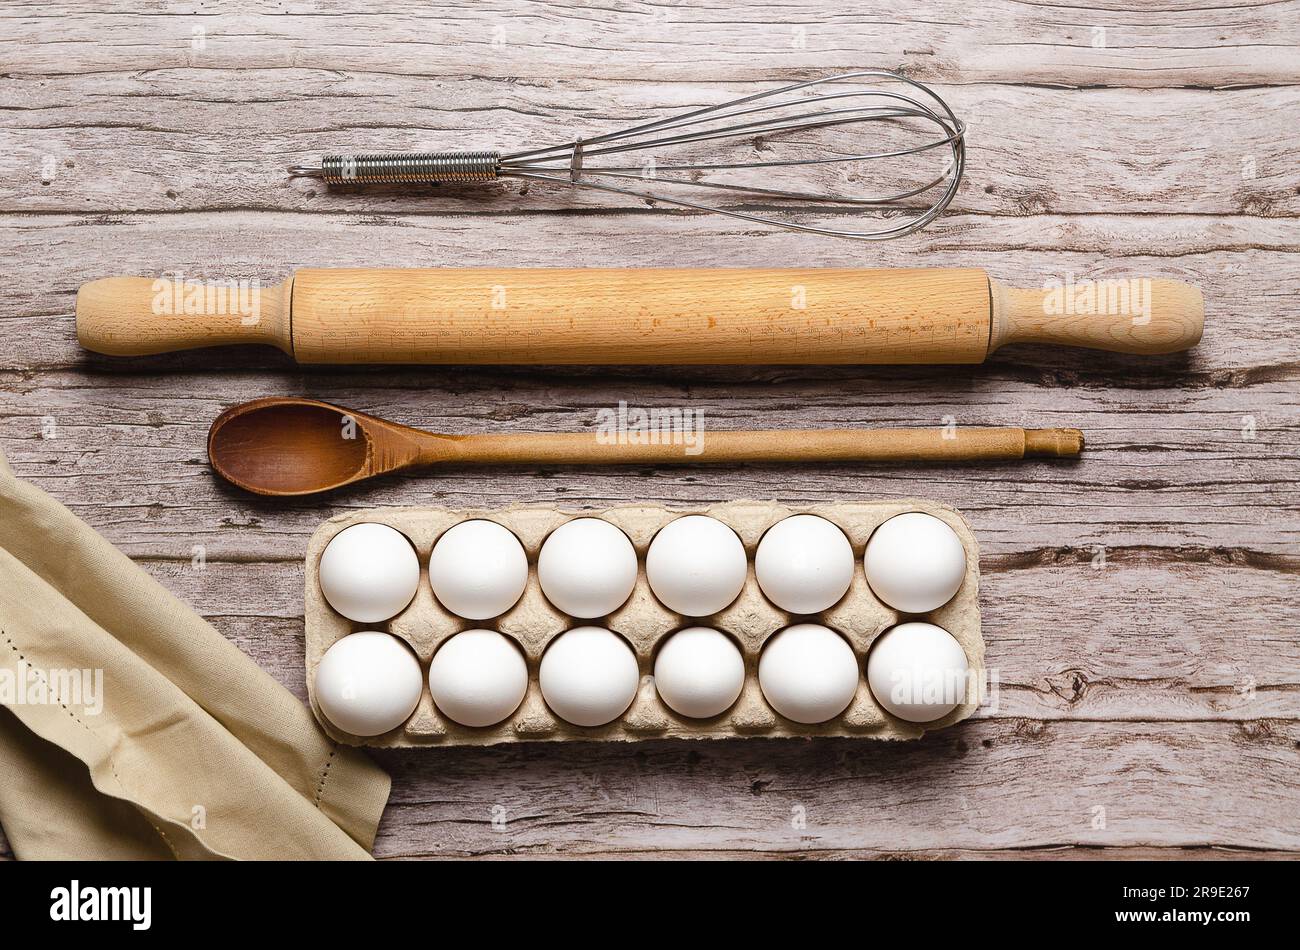 A whisk, a rolling pin, a wooden spoon, some white eggs in an egg container and a piece of cloth on a wooden table. Stock Photo